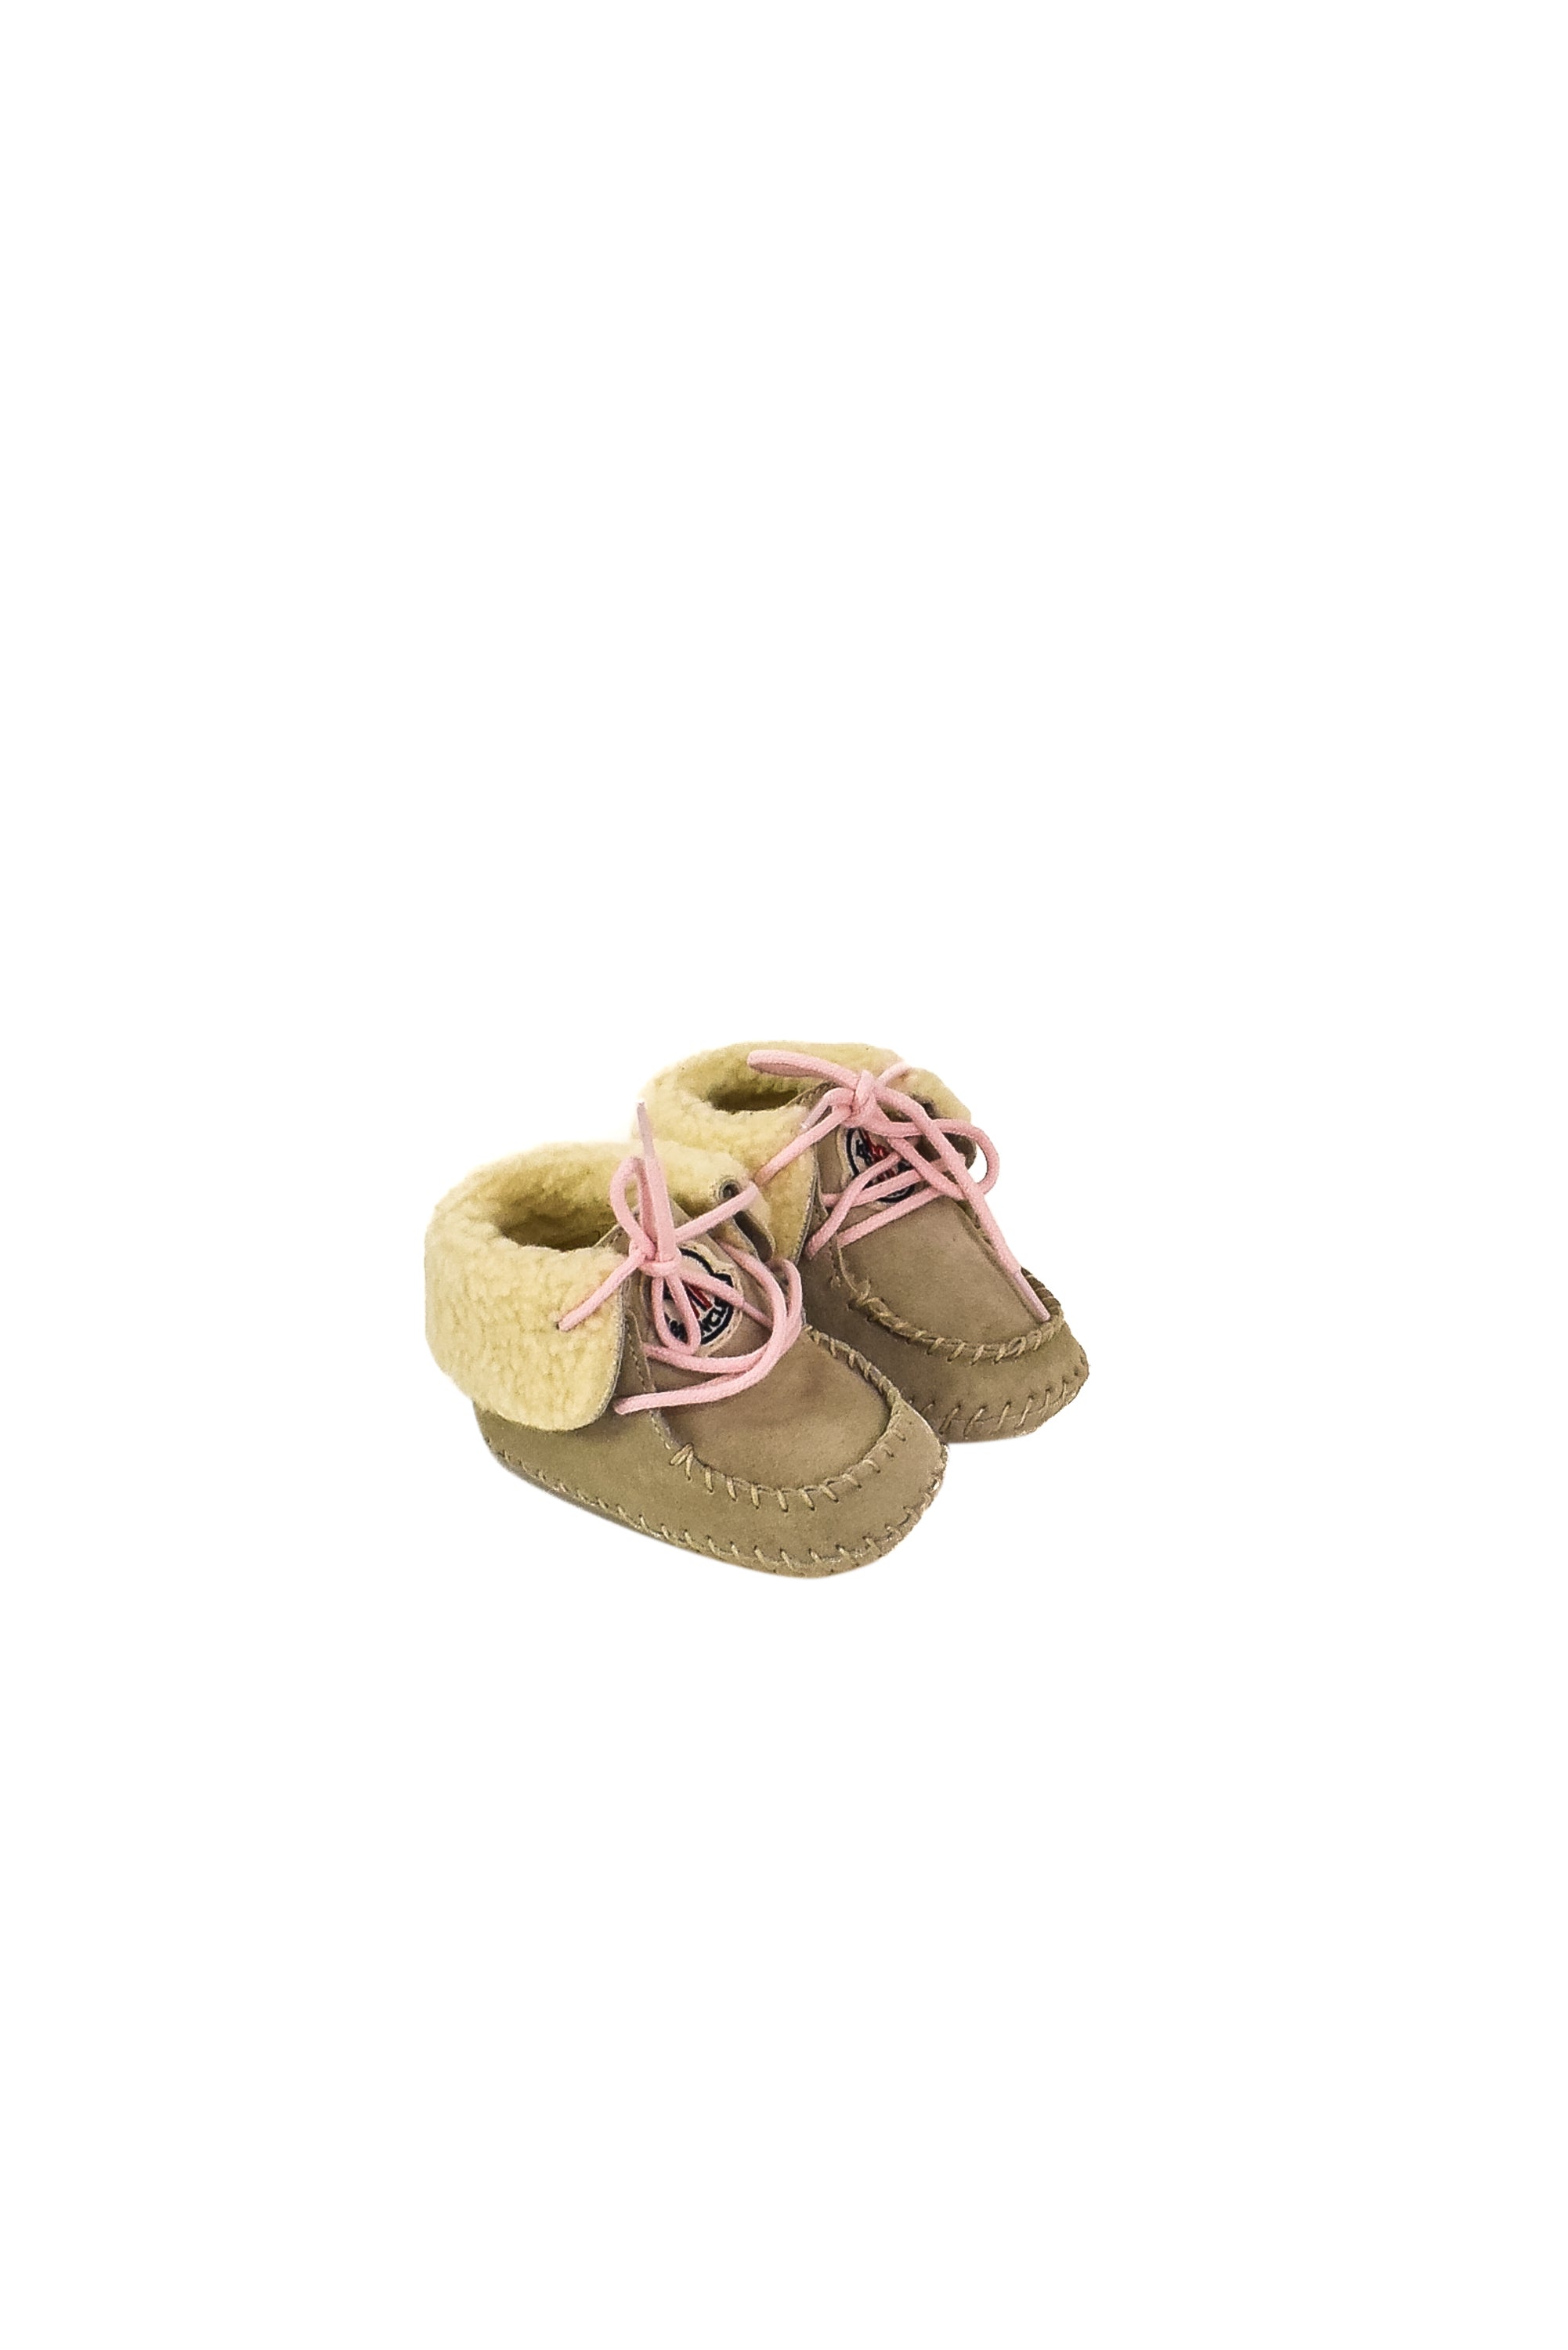 baby moncler shoes